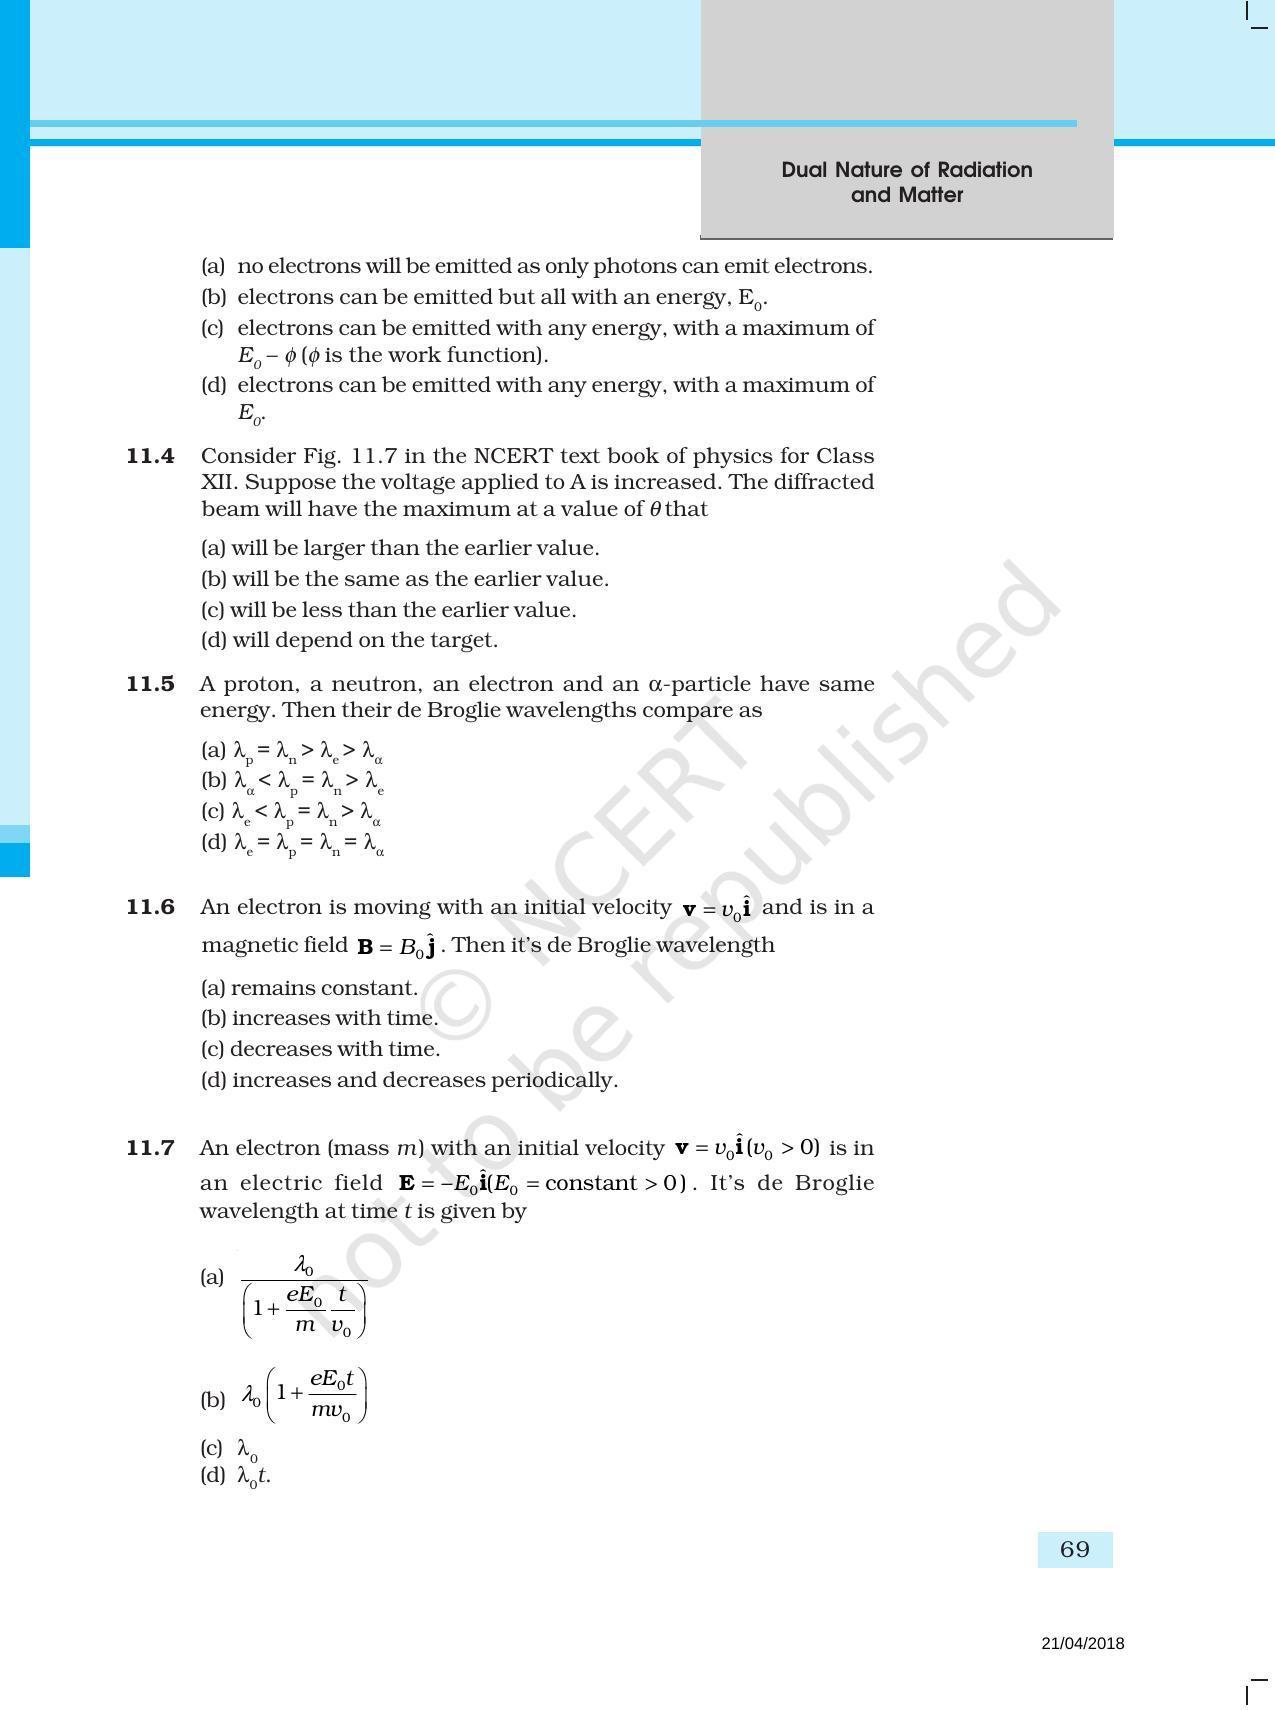 NCERT Exemplar Book for Class 12 Physics: Chapter 11 Dual Nature of Radiation and Matter - Page 2